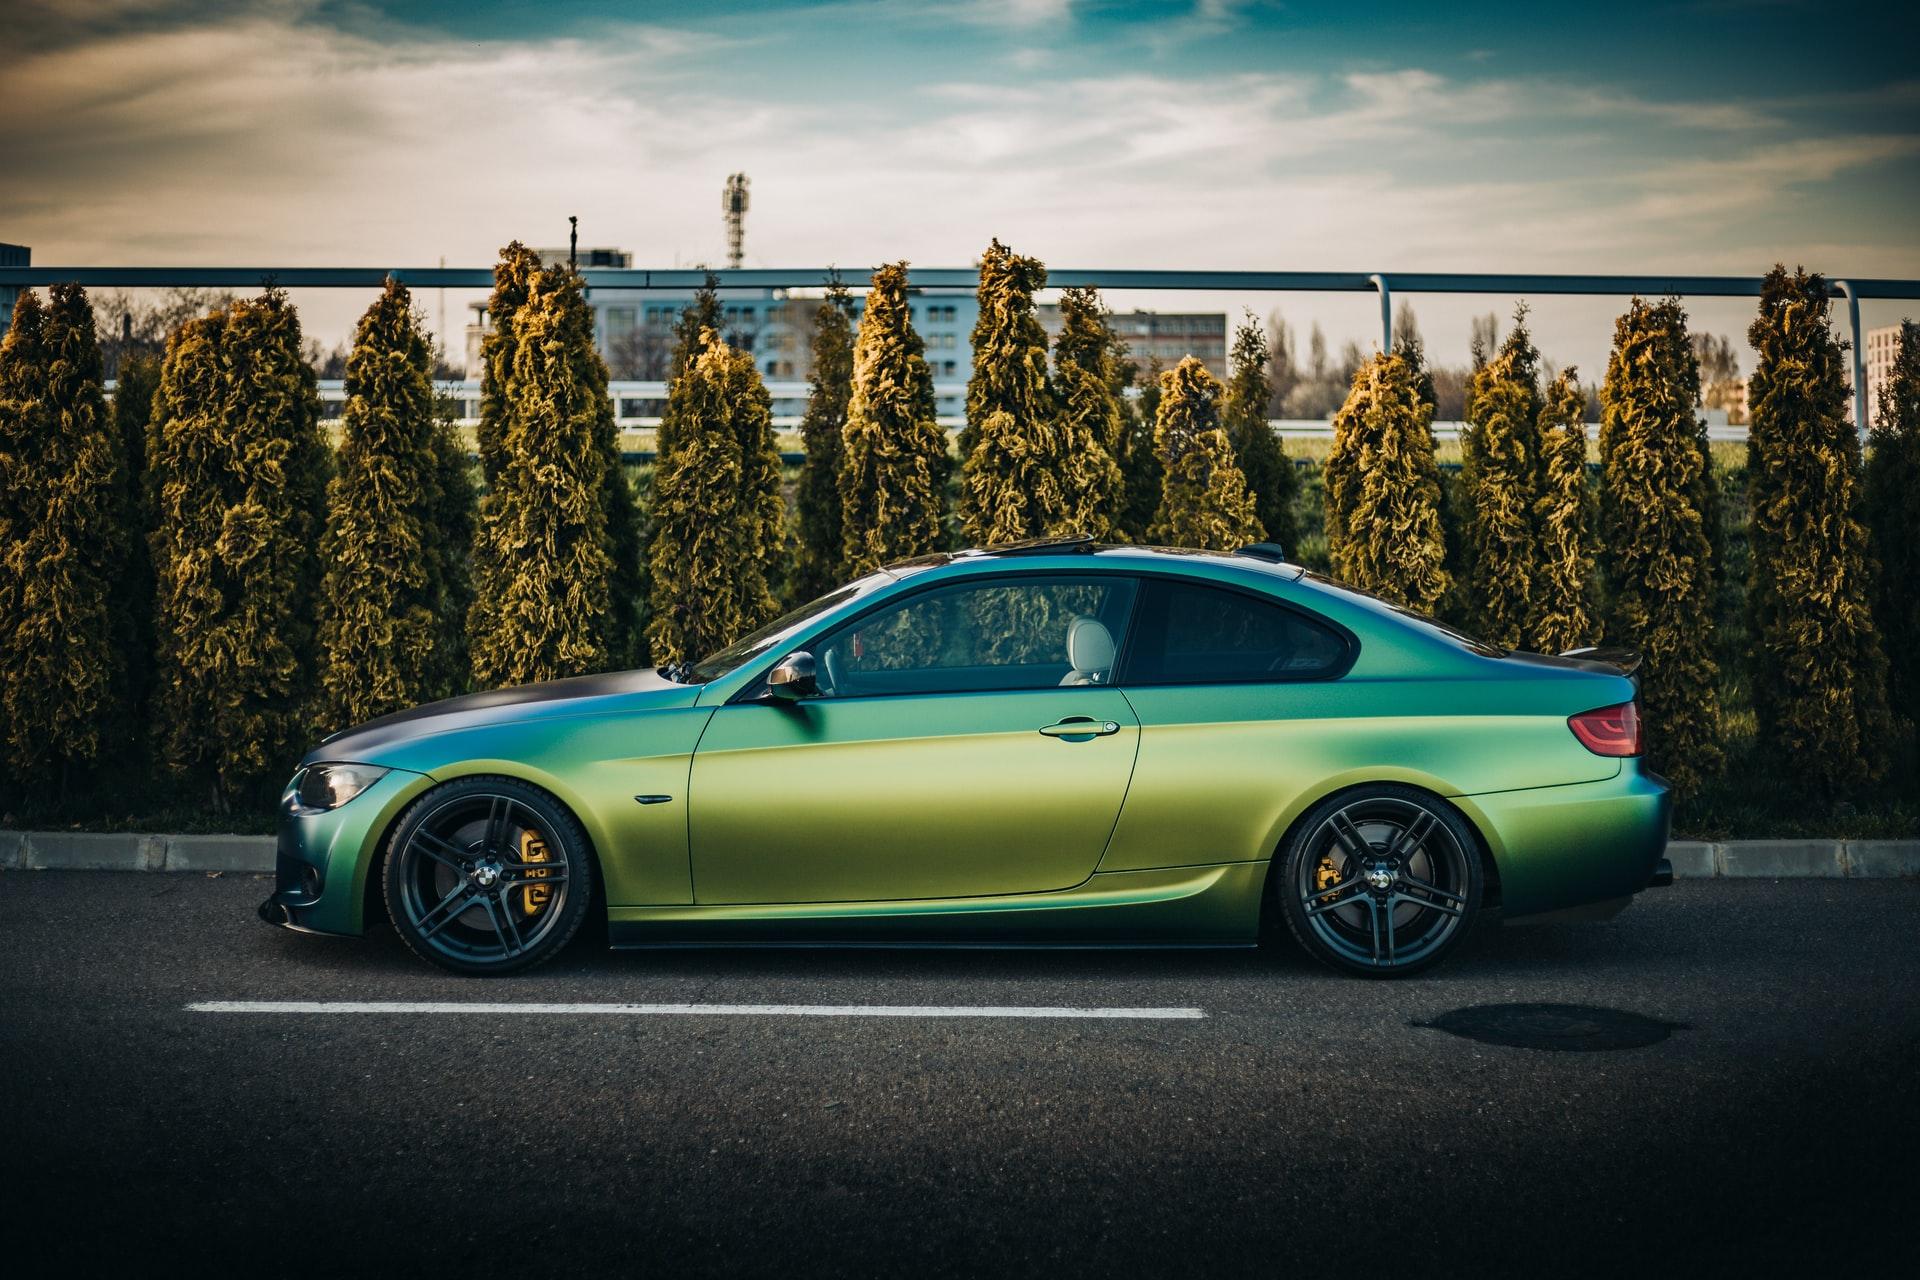 Green wrapped BMW parked in a lot